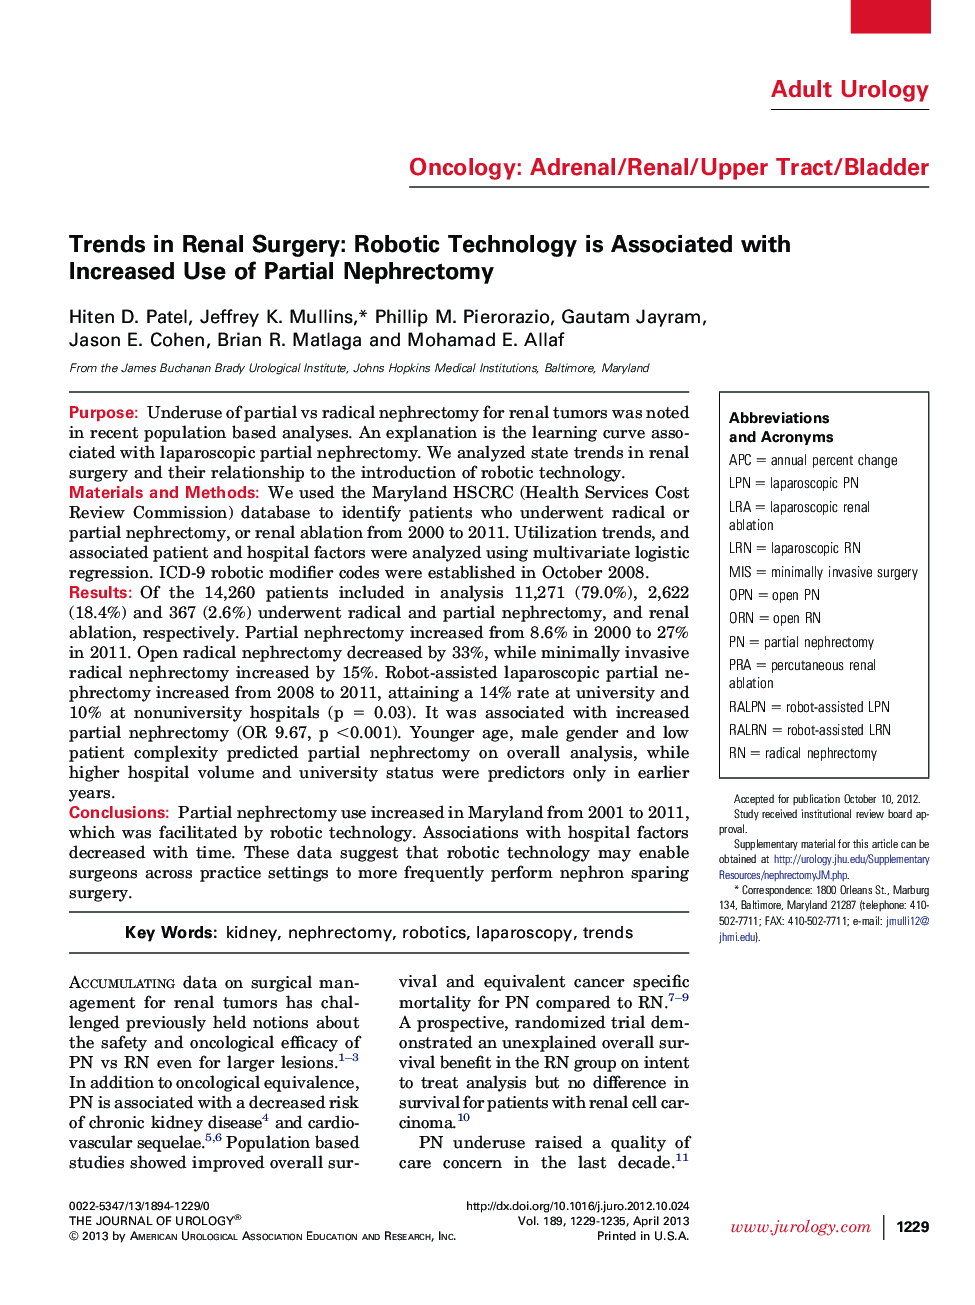 Trends in Renal Surgery: Robotic Technology is Associated with Increased Use of Partial Nephrectomy 